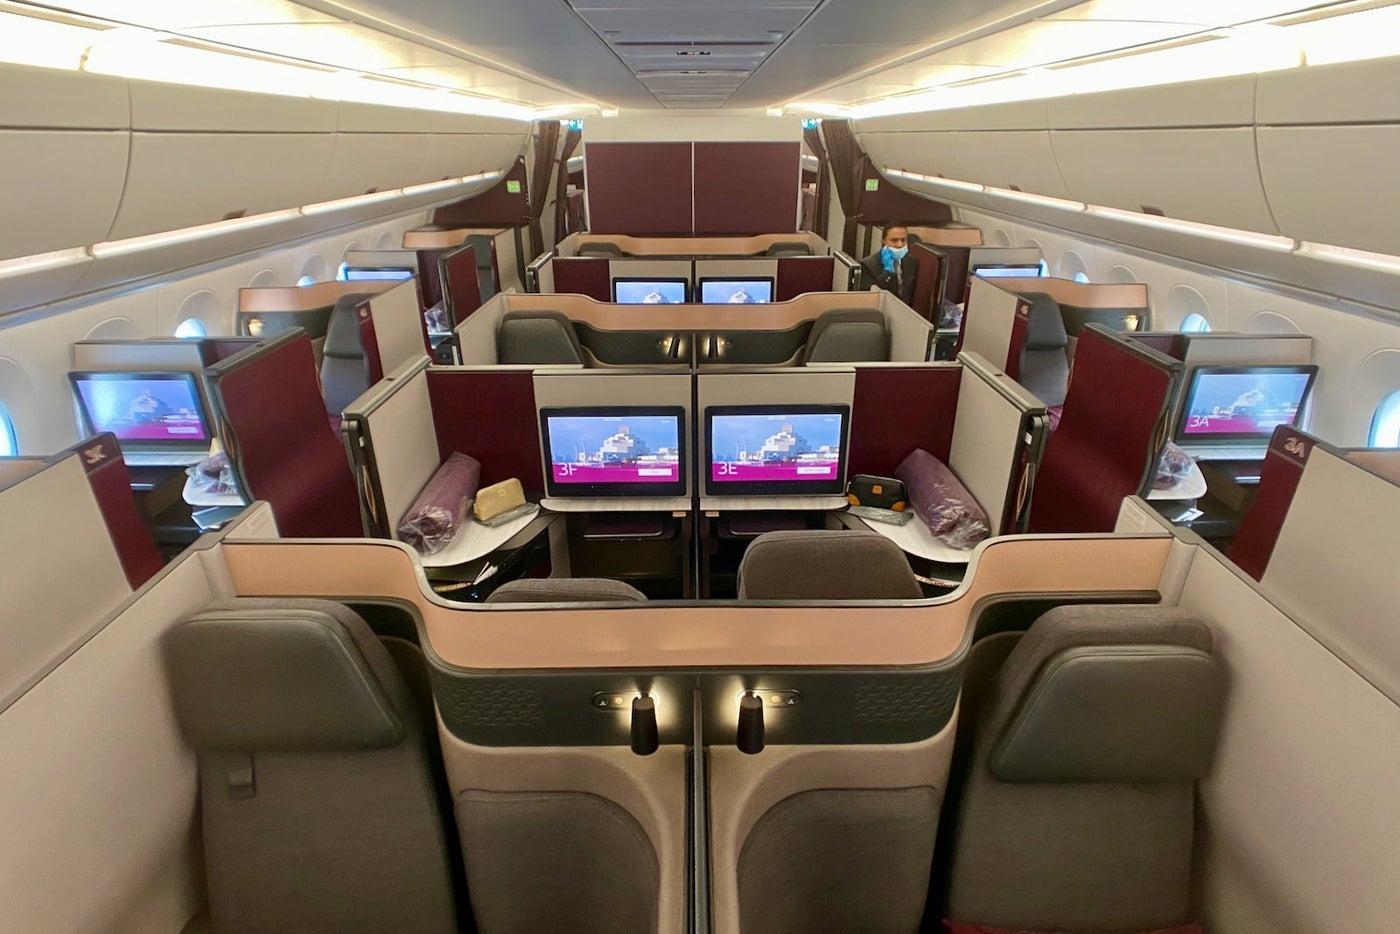 How to book Qatar Airways Qsuite business class flights to Australia for just 90,000 Avios - The Points Guy UK